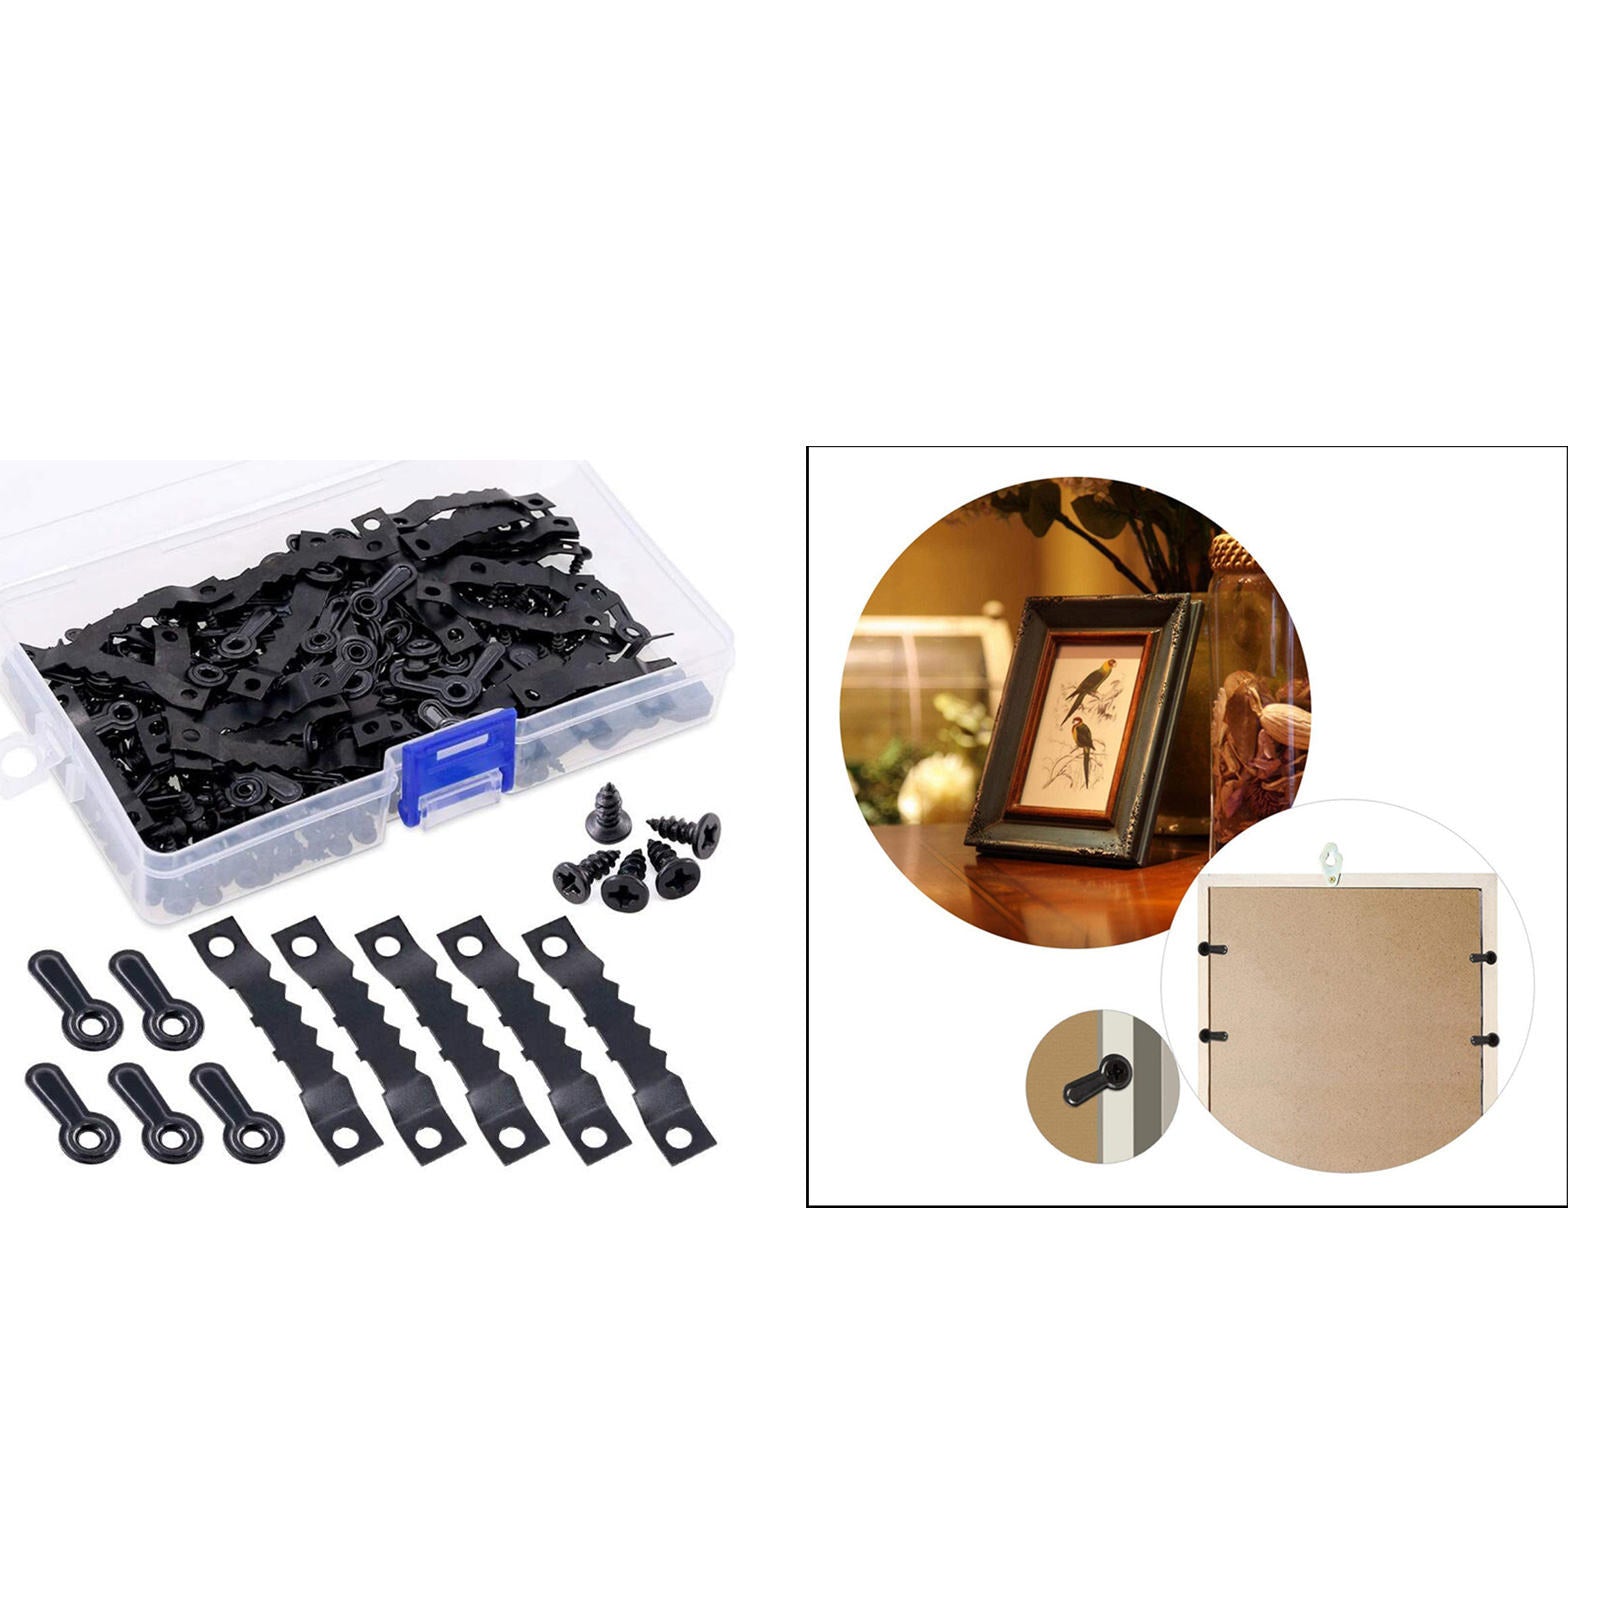 Picture Hangers Kit with Screws Backing Clips Hardware for Hanging Drawing